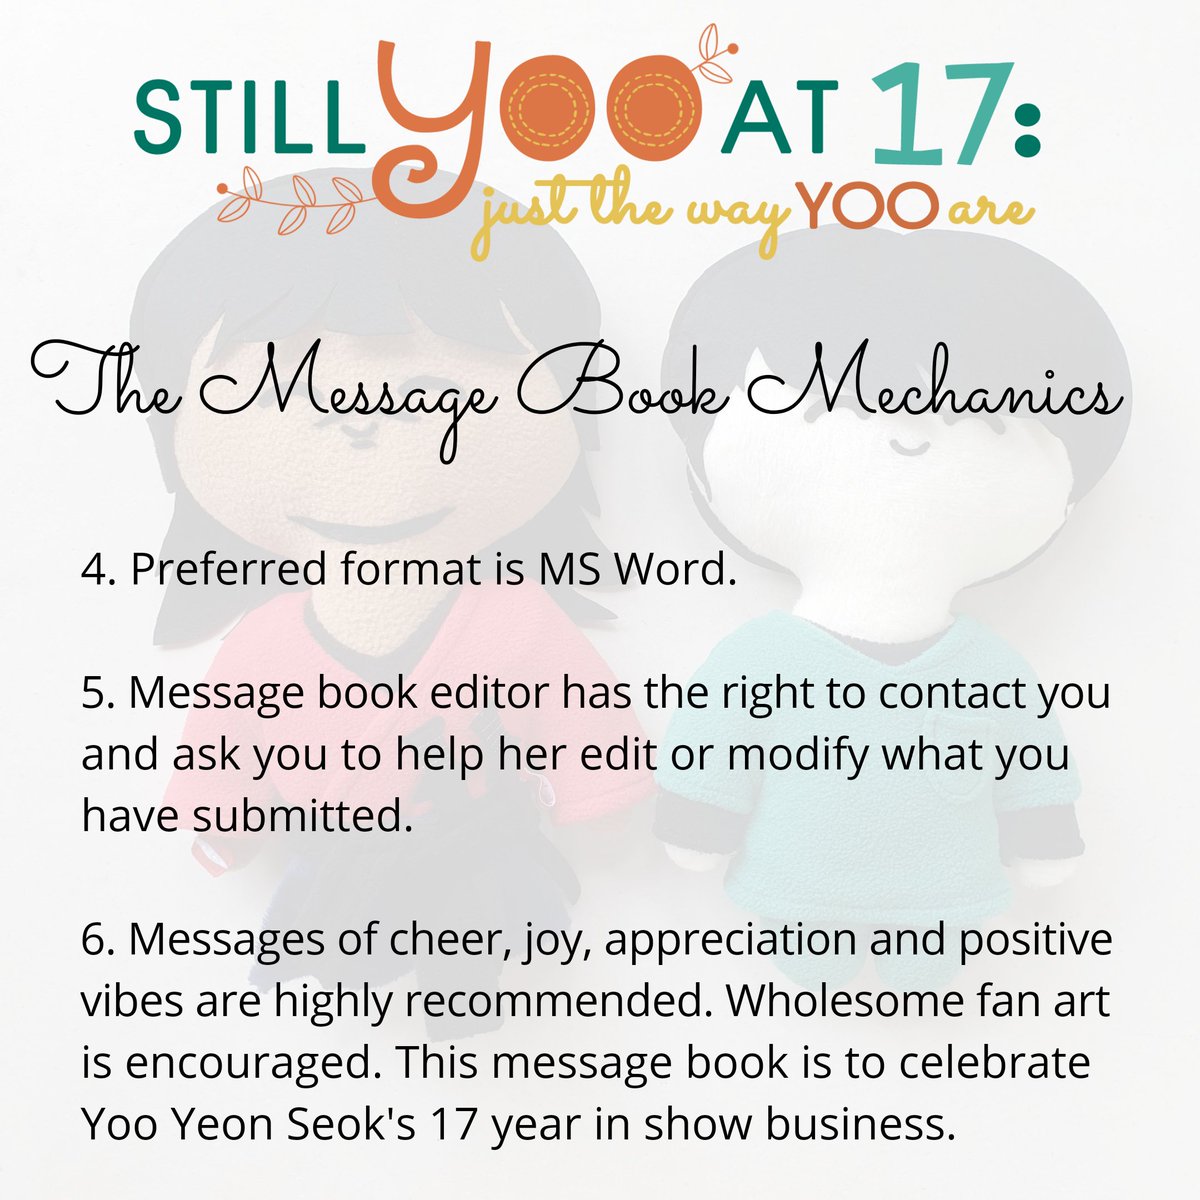 Submission of entries for the message book to go with our gifts is now OPEN. Please do read the mechanics below. Contributions, no matter how big or small, are still welcome! Please see our PINNED POST for more details.  #YooYeonSeok  #StillYOOAt17